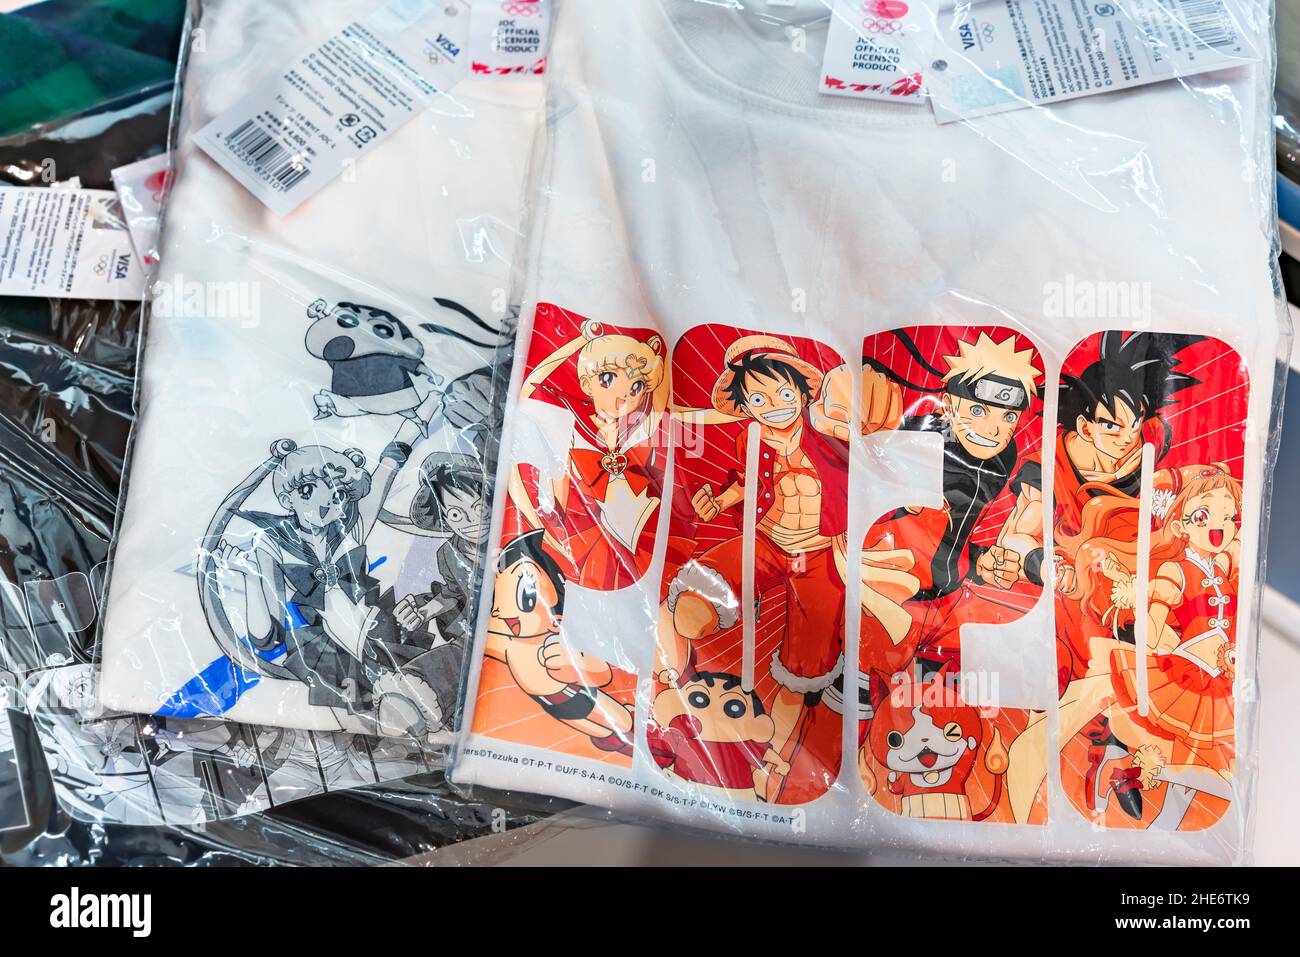 tokyo, japan - september 21 2021: T-shirts wrapped in a transparent plastic on a stall of 2020 Olympics Store with Japanese manga or anime characters Stock Photo